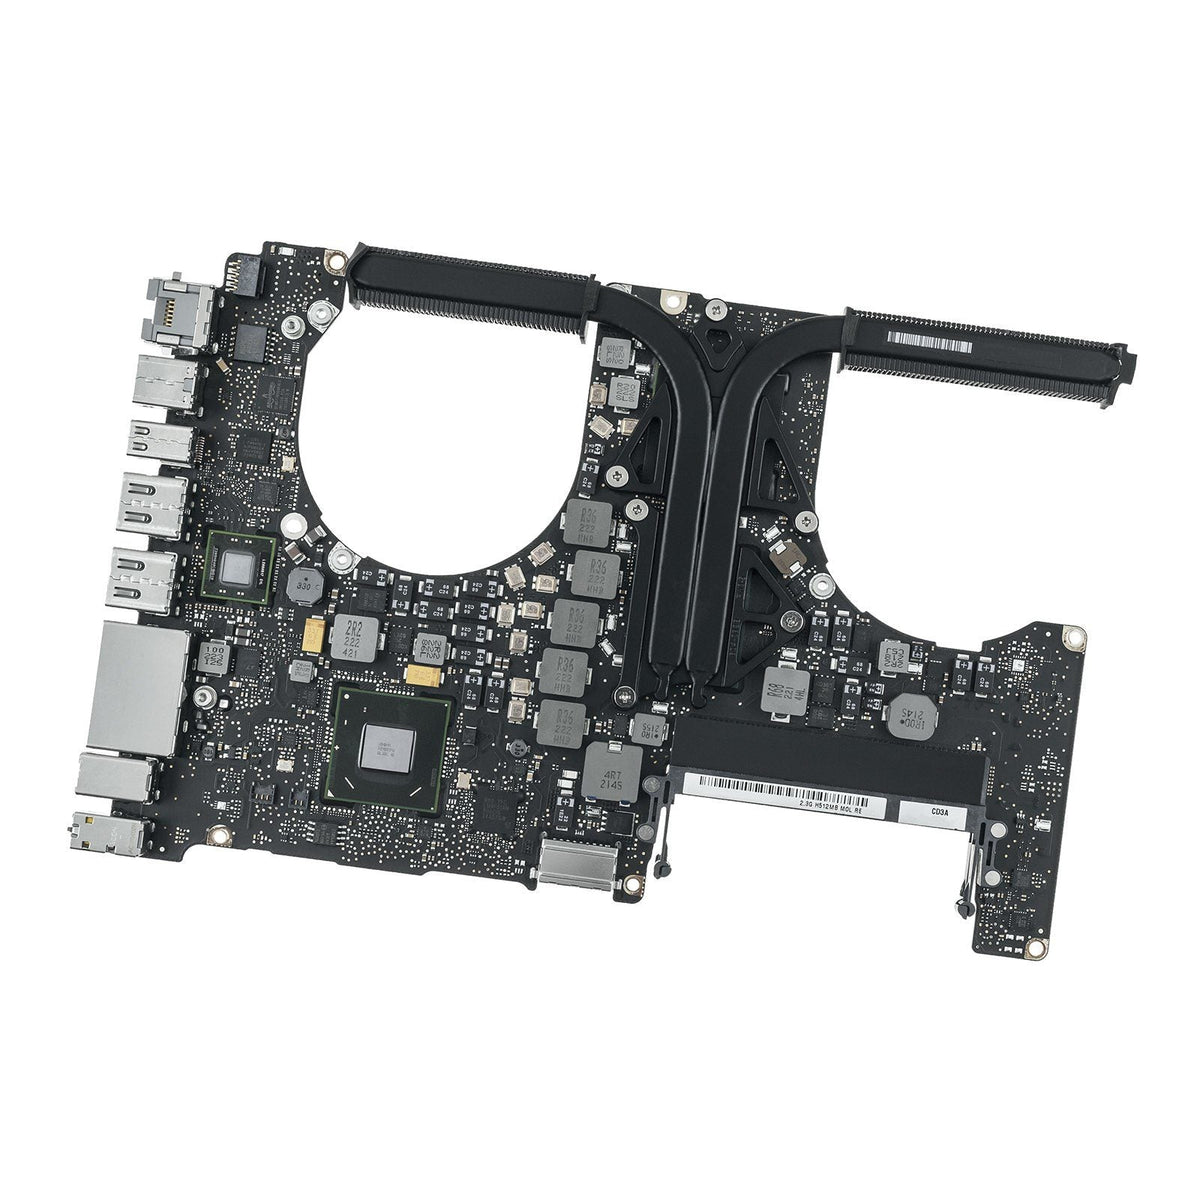 MOTHERBOARD FOR MACBOOK PRO 15" A1286 (MID 2012)